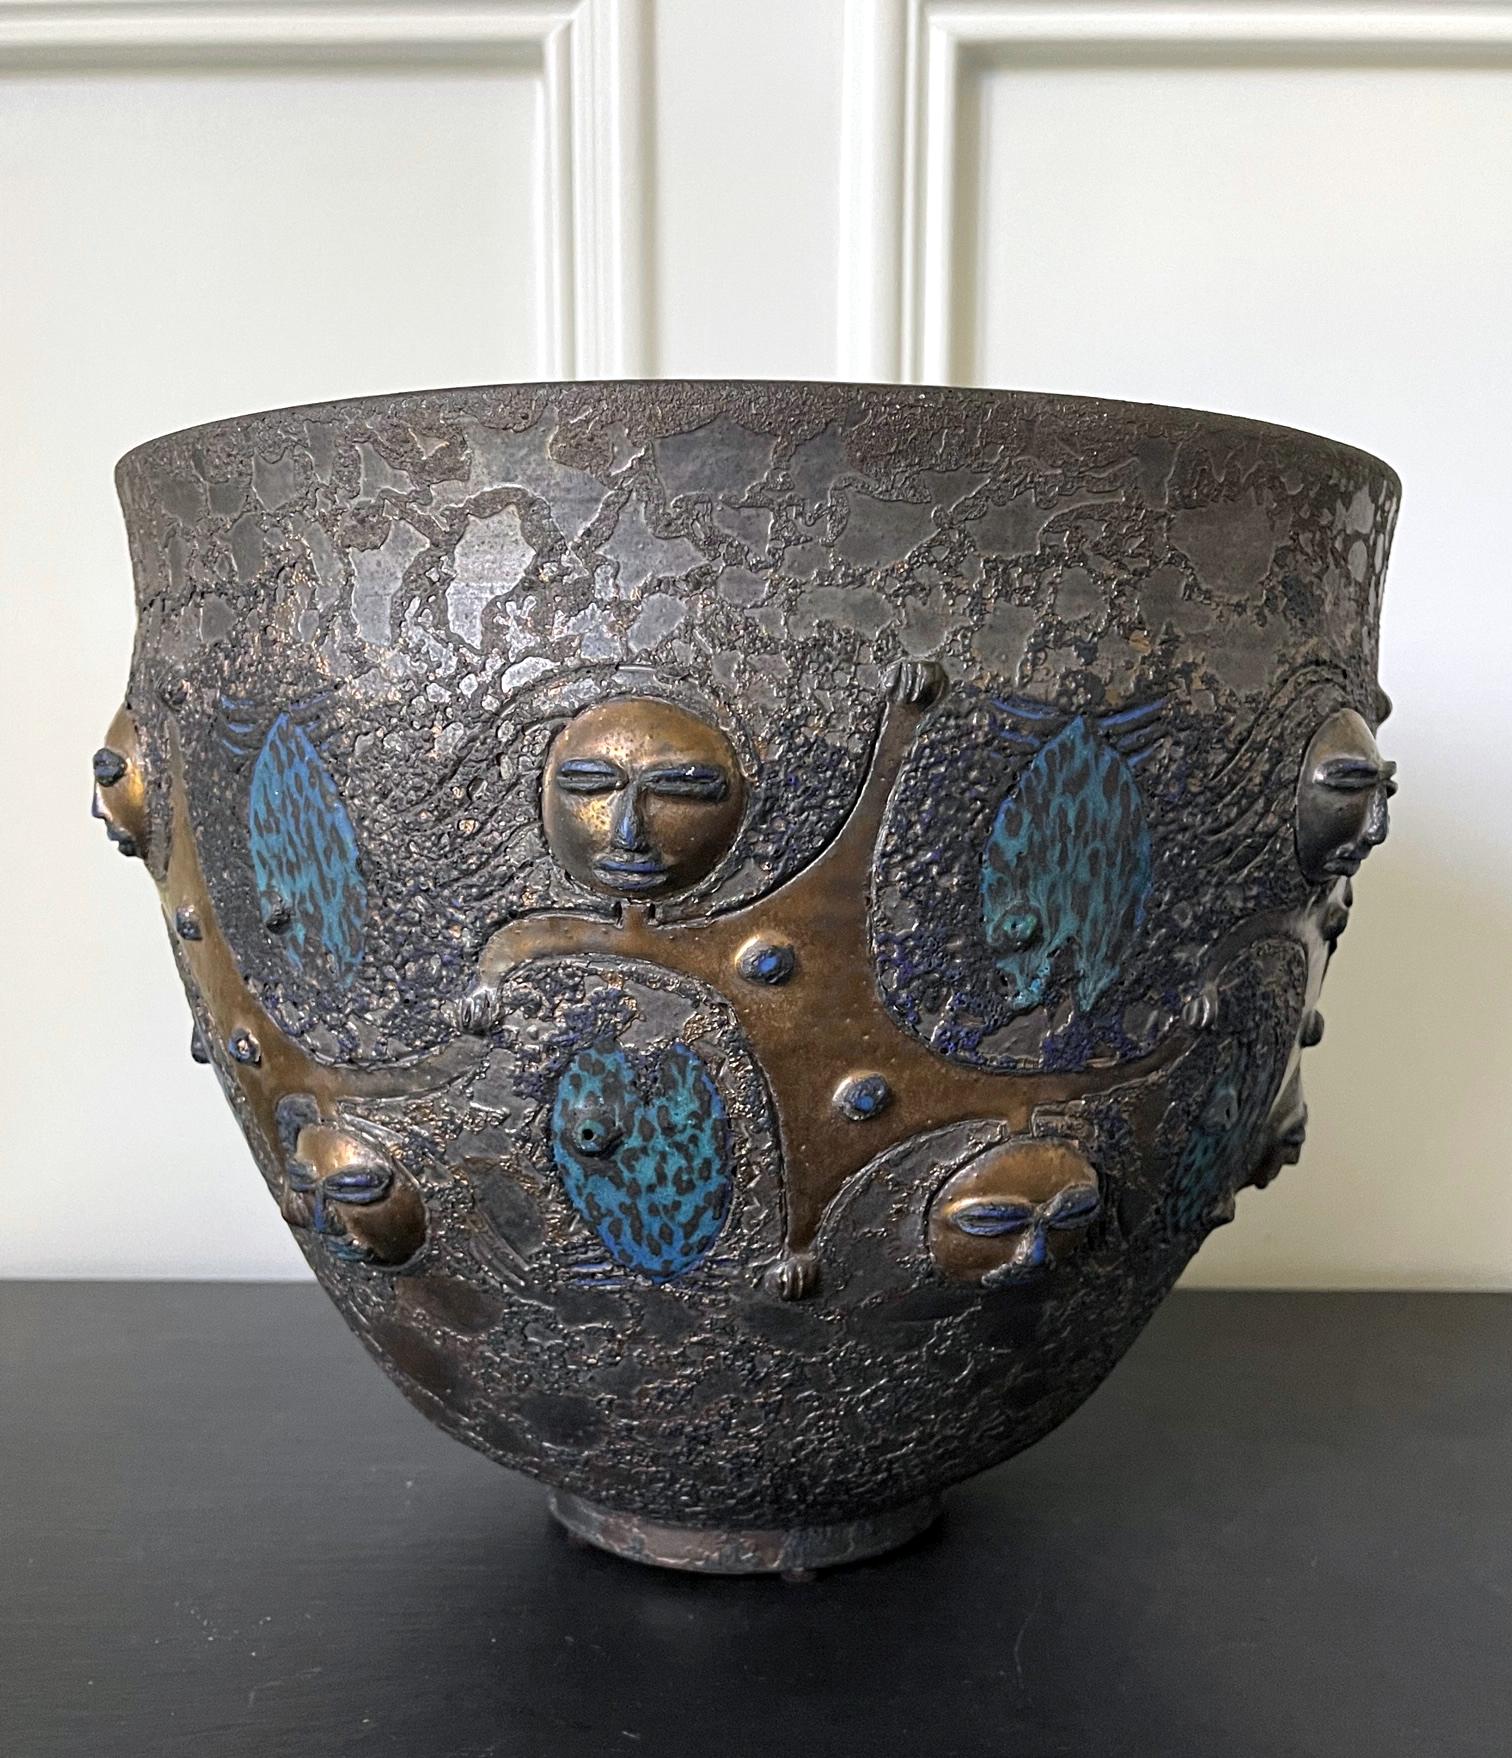 A large and stunning stoneware ceramic vessel in the form of an urn or a deep bowl by American potters Mary and Edwin Scheier (1908-2007;1910-2008) dated to 1984. The darkly glazed vessel features their iconic design of interlinked figures, arranged